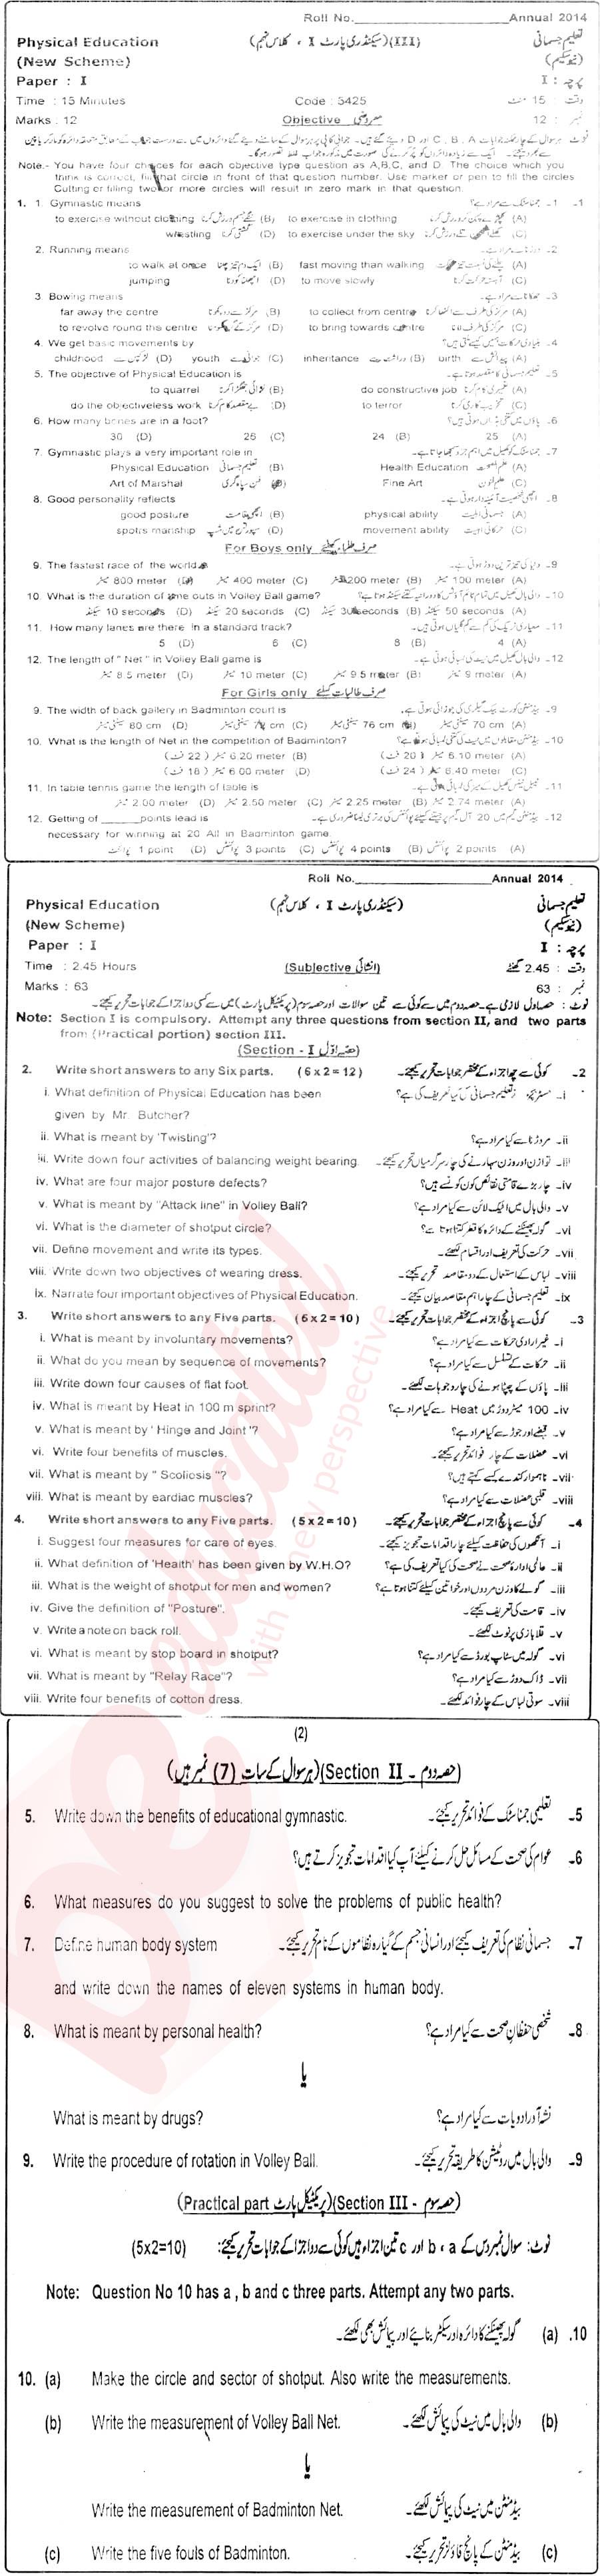 Health and Physical Education 9th class Past Paper Group 1 BISE Sahiwal 2014